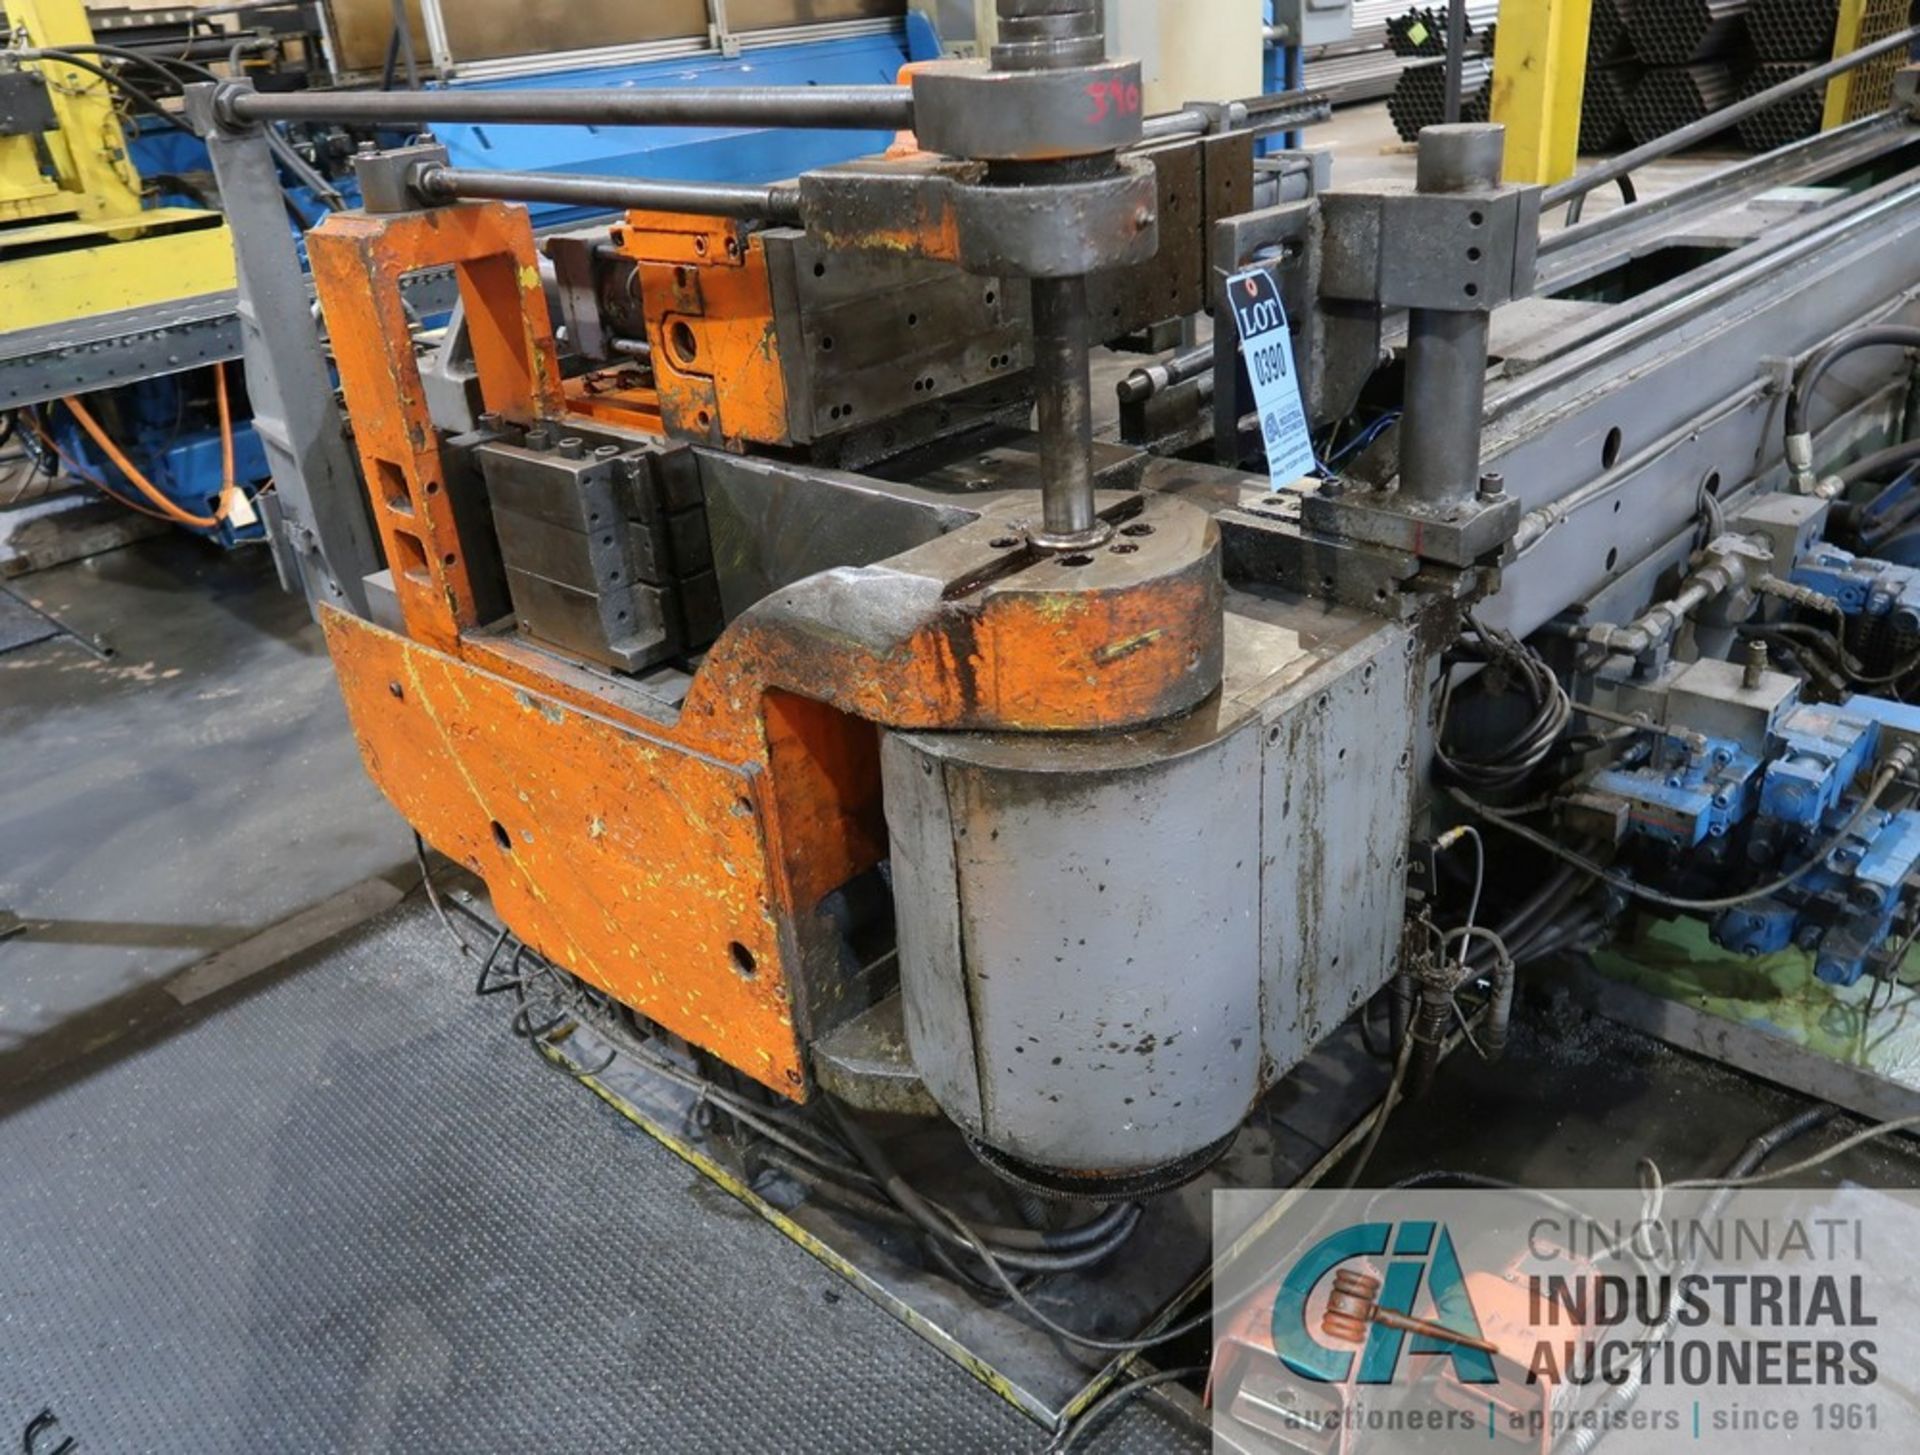 3" ADDISON DB76-ST3 MULTI-STACK 5-AXIS CNC HYDRAULIC TUBE BENDER; S/N 9952, ASSET NO. AB-14, 3"